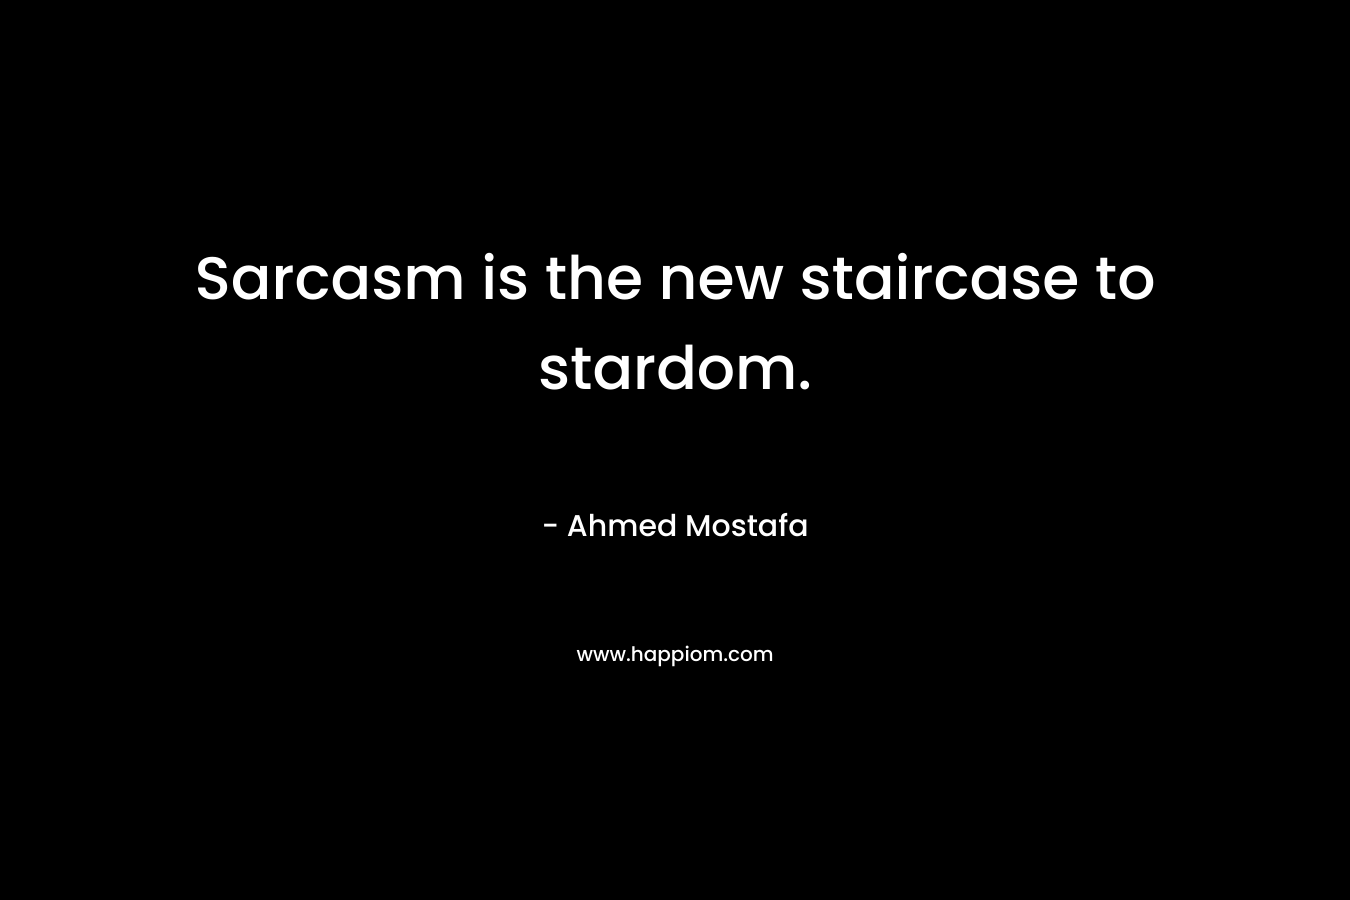 Sarcasm is the new staircase to stardom. – Ahmed Mostafa